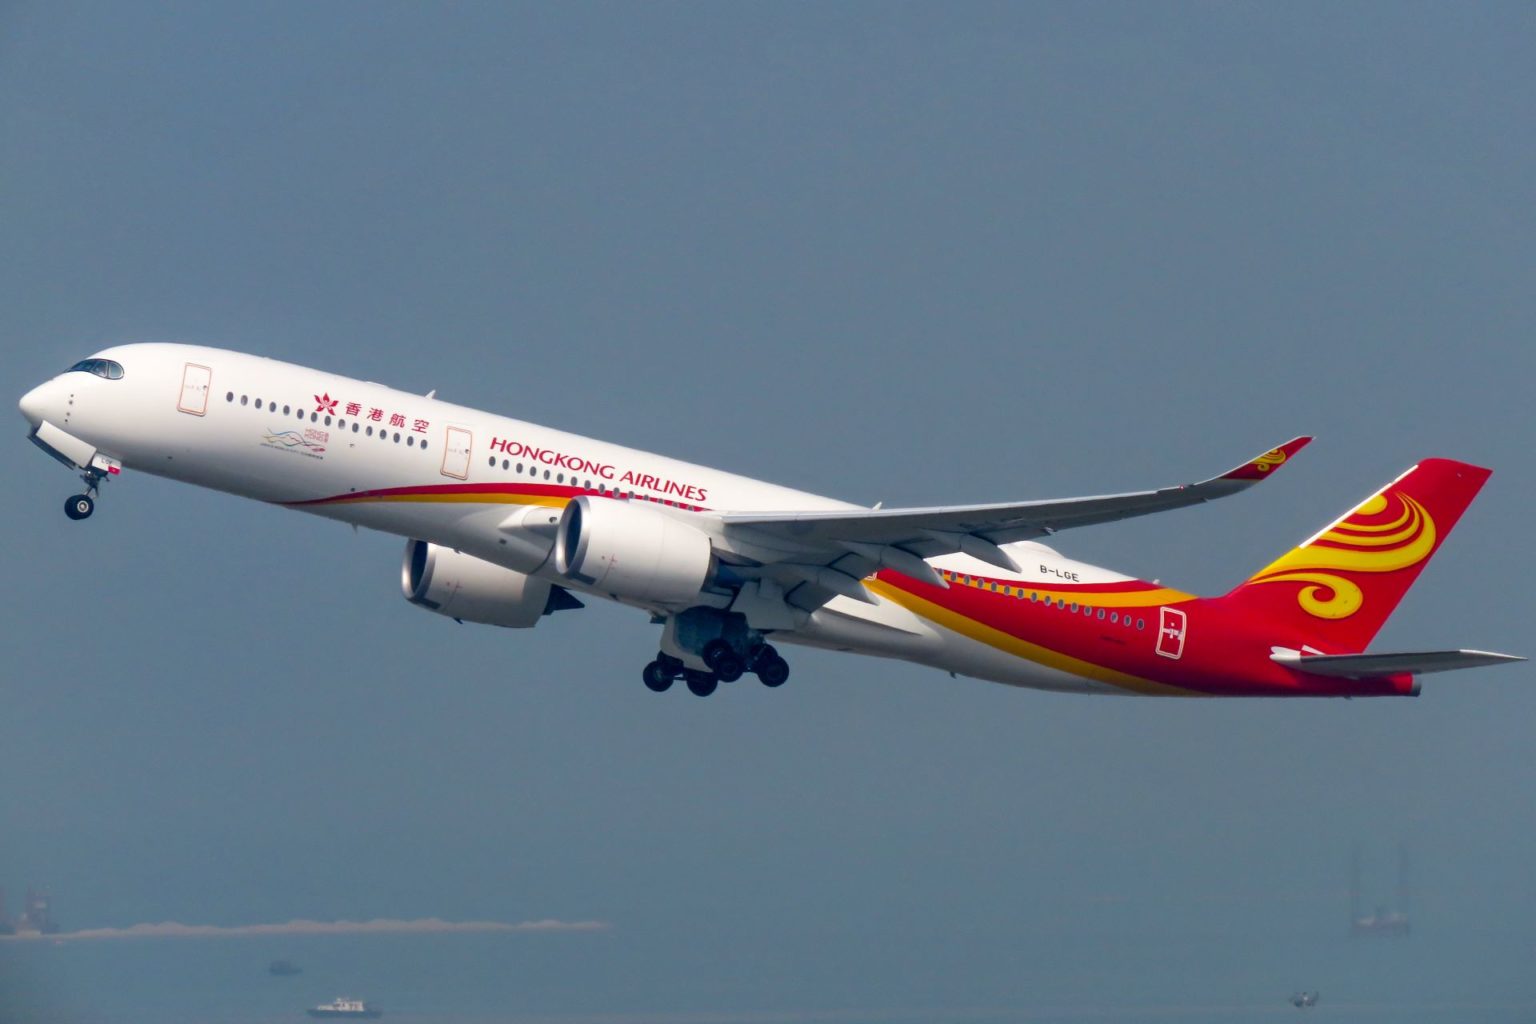 Hong Kong airlines 6,000 free tickets